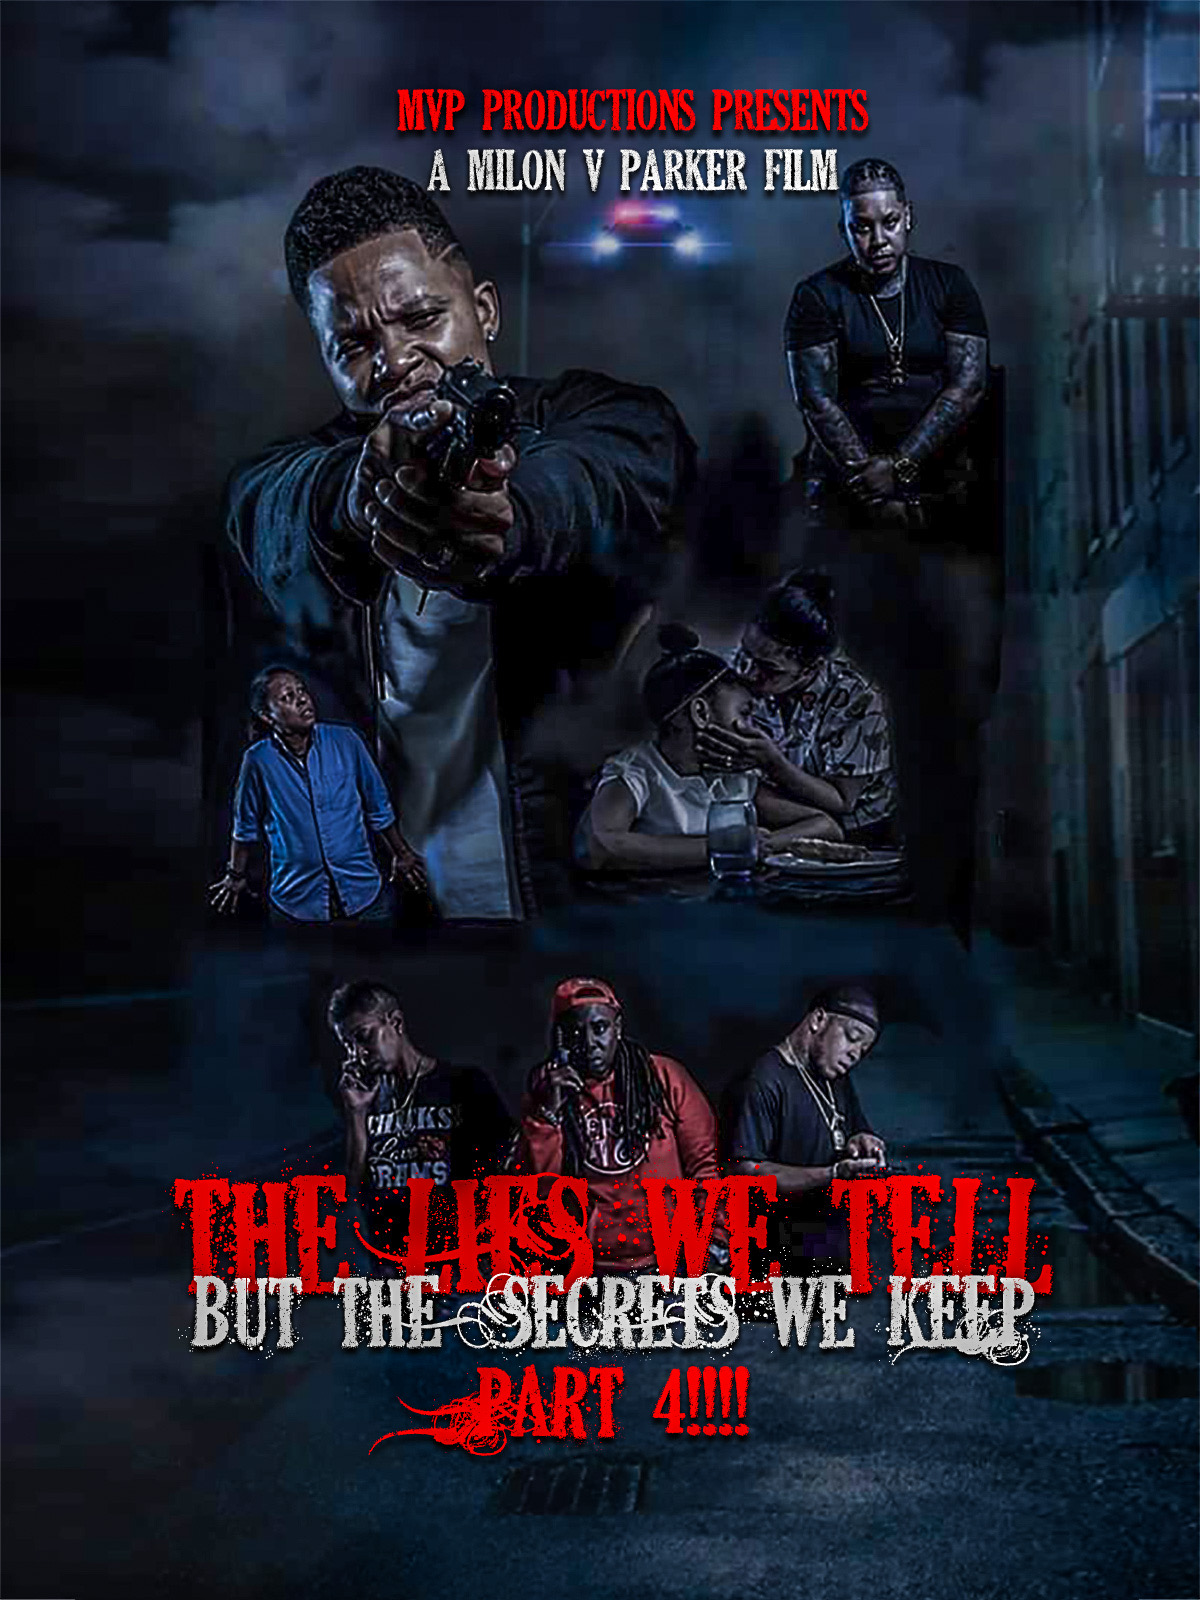 The lies we tell but the secrets we keep part 4 (2019) постер